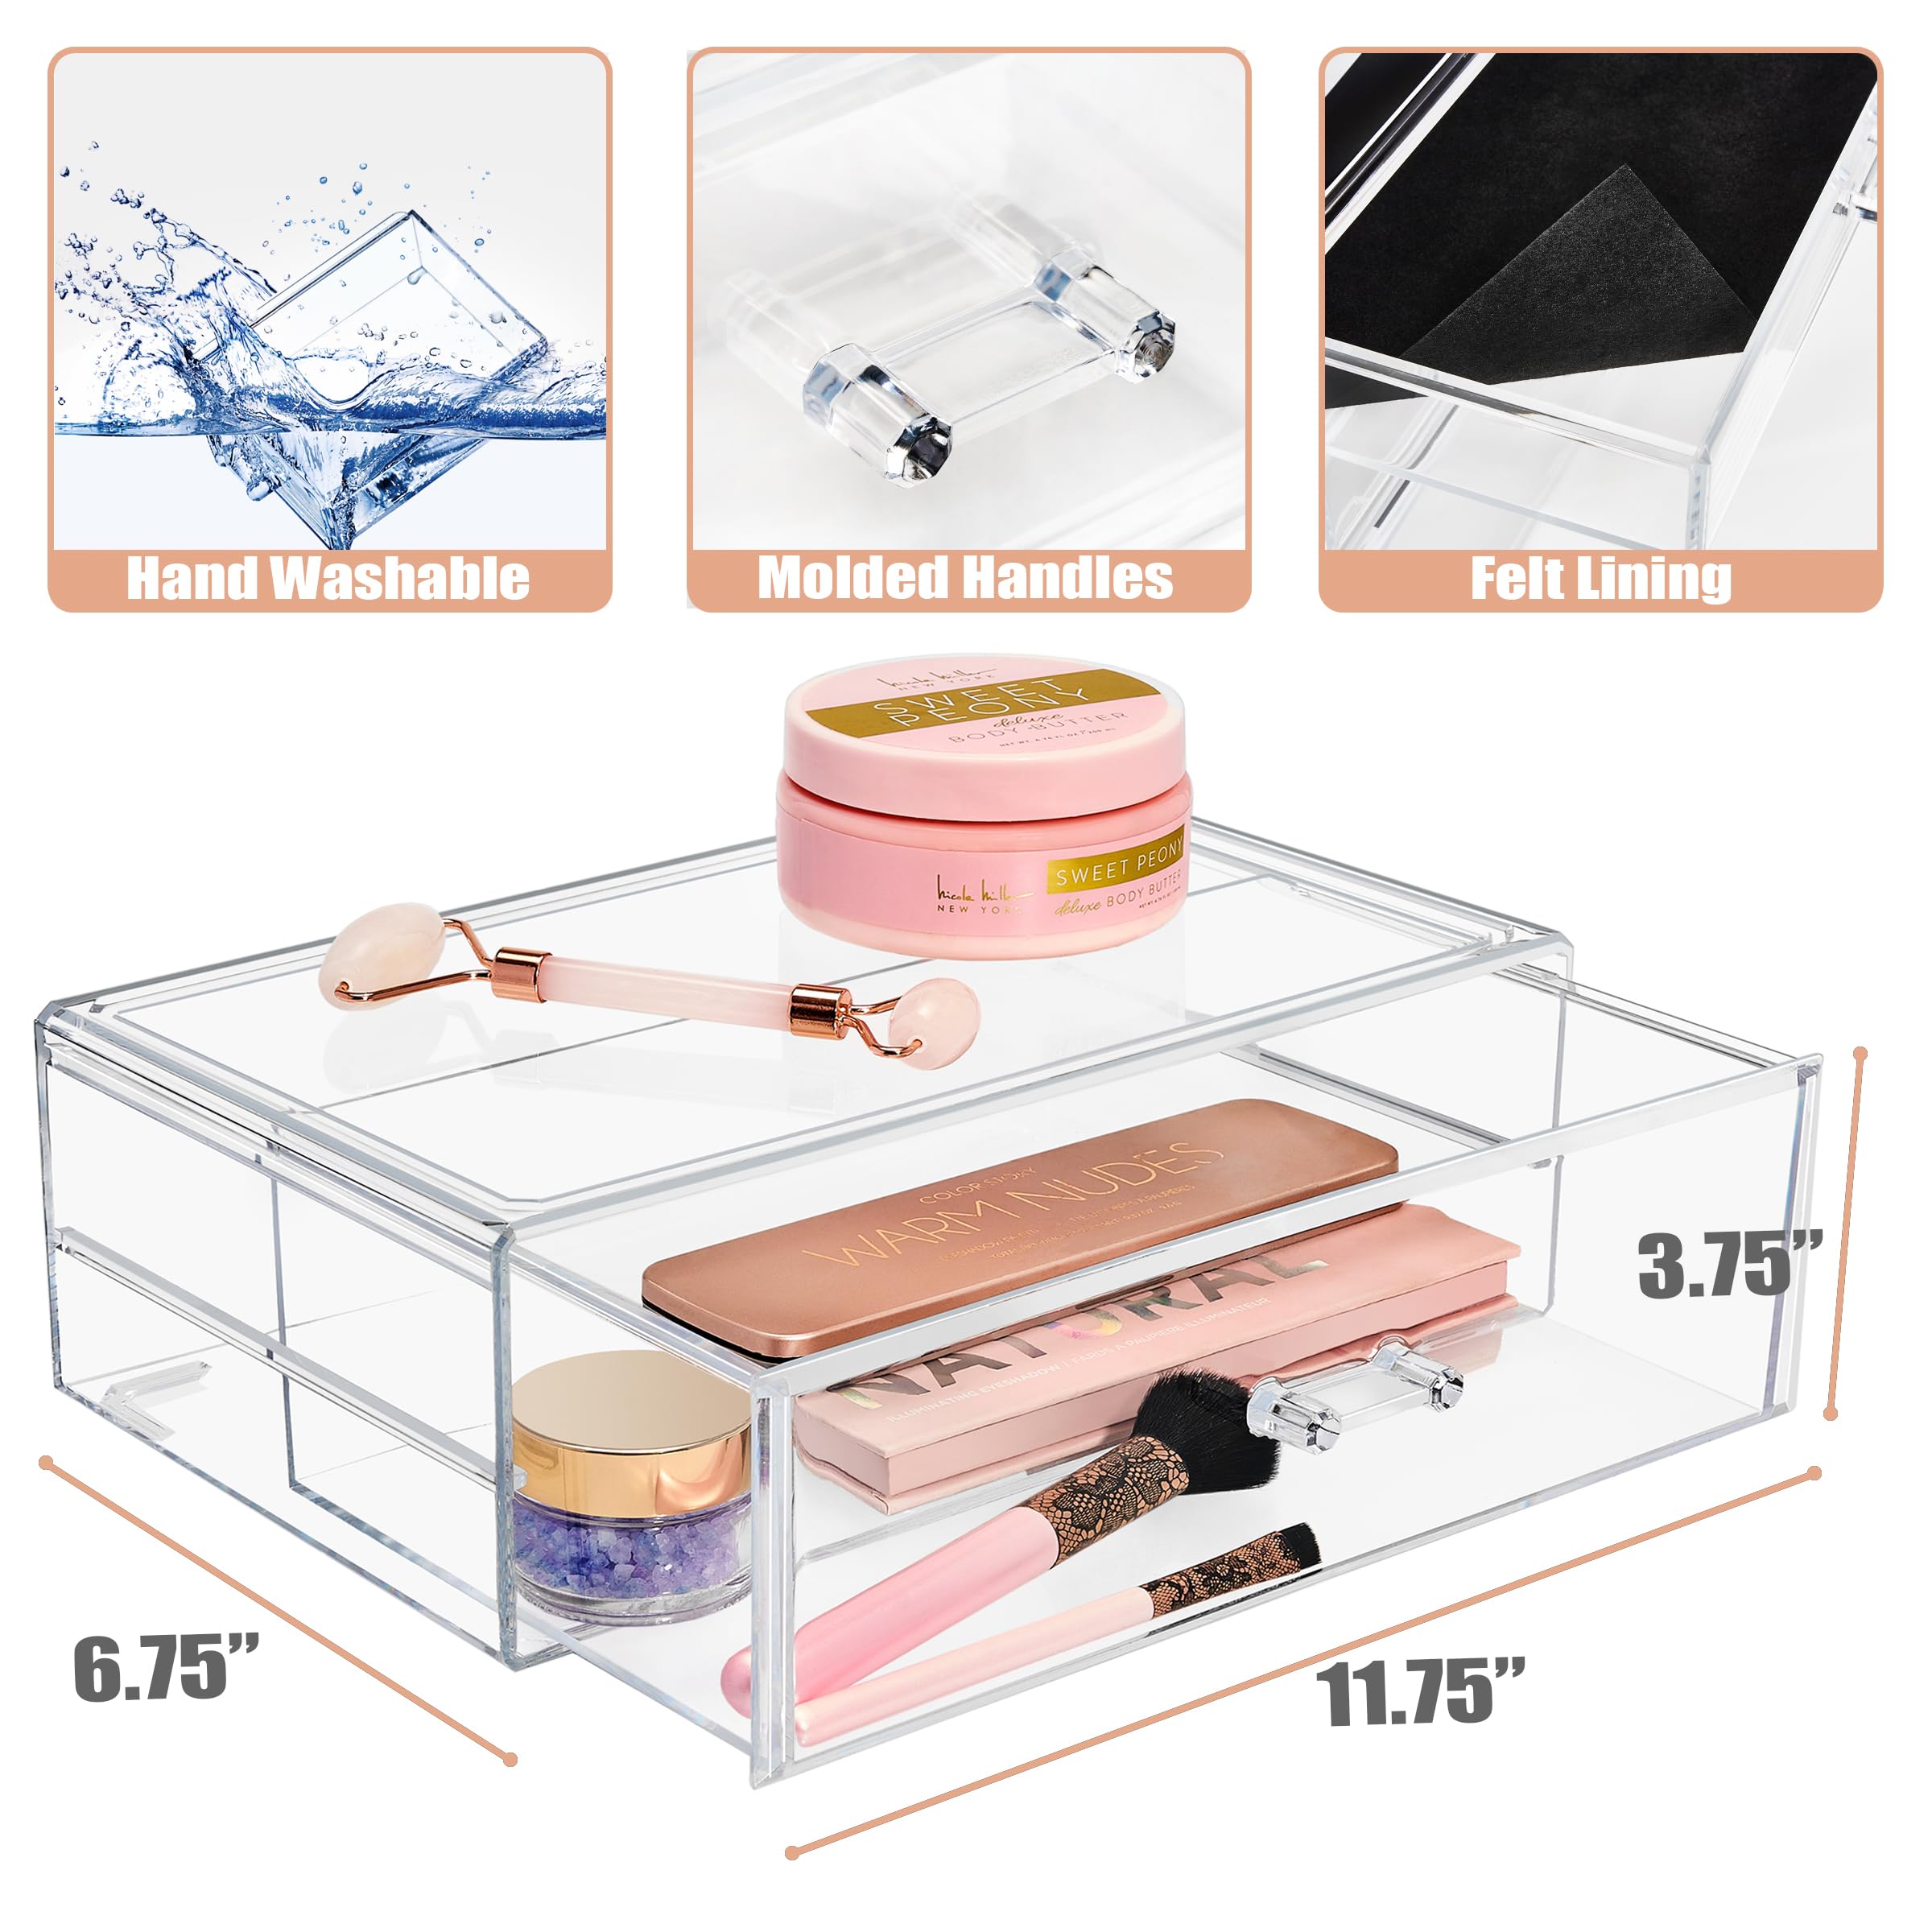 Sorbus Makeup Organizer Bundle - Includes 1 Extra Large Makeup Tower and 1 Makeup Organizer with 1 Pull-Out Drawer